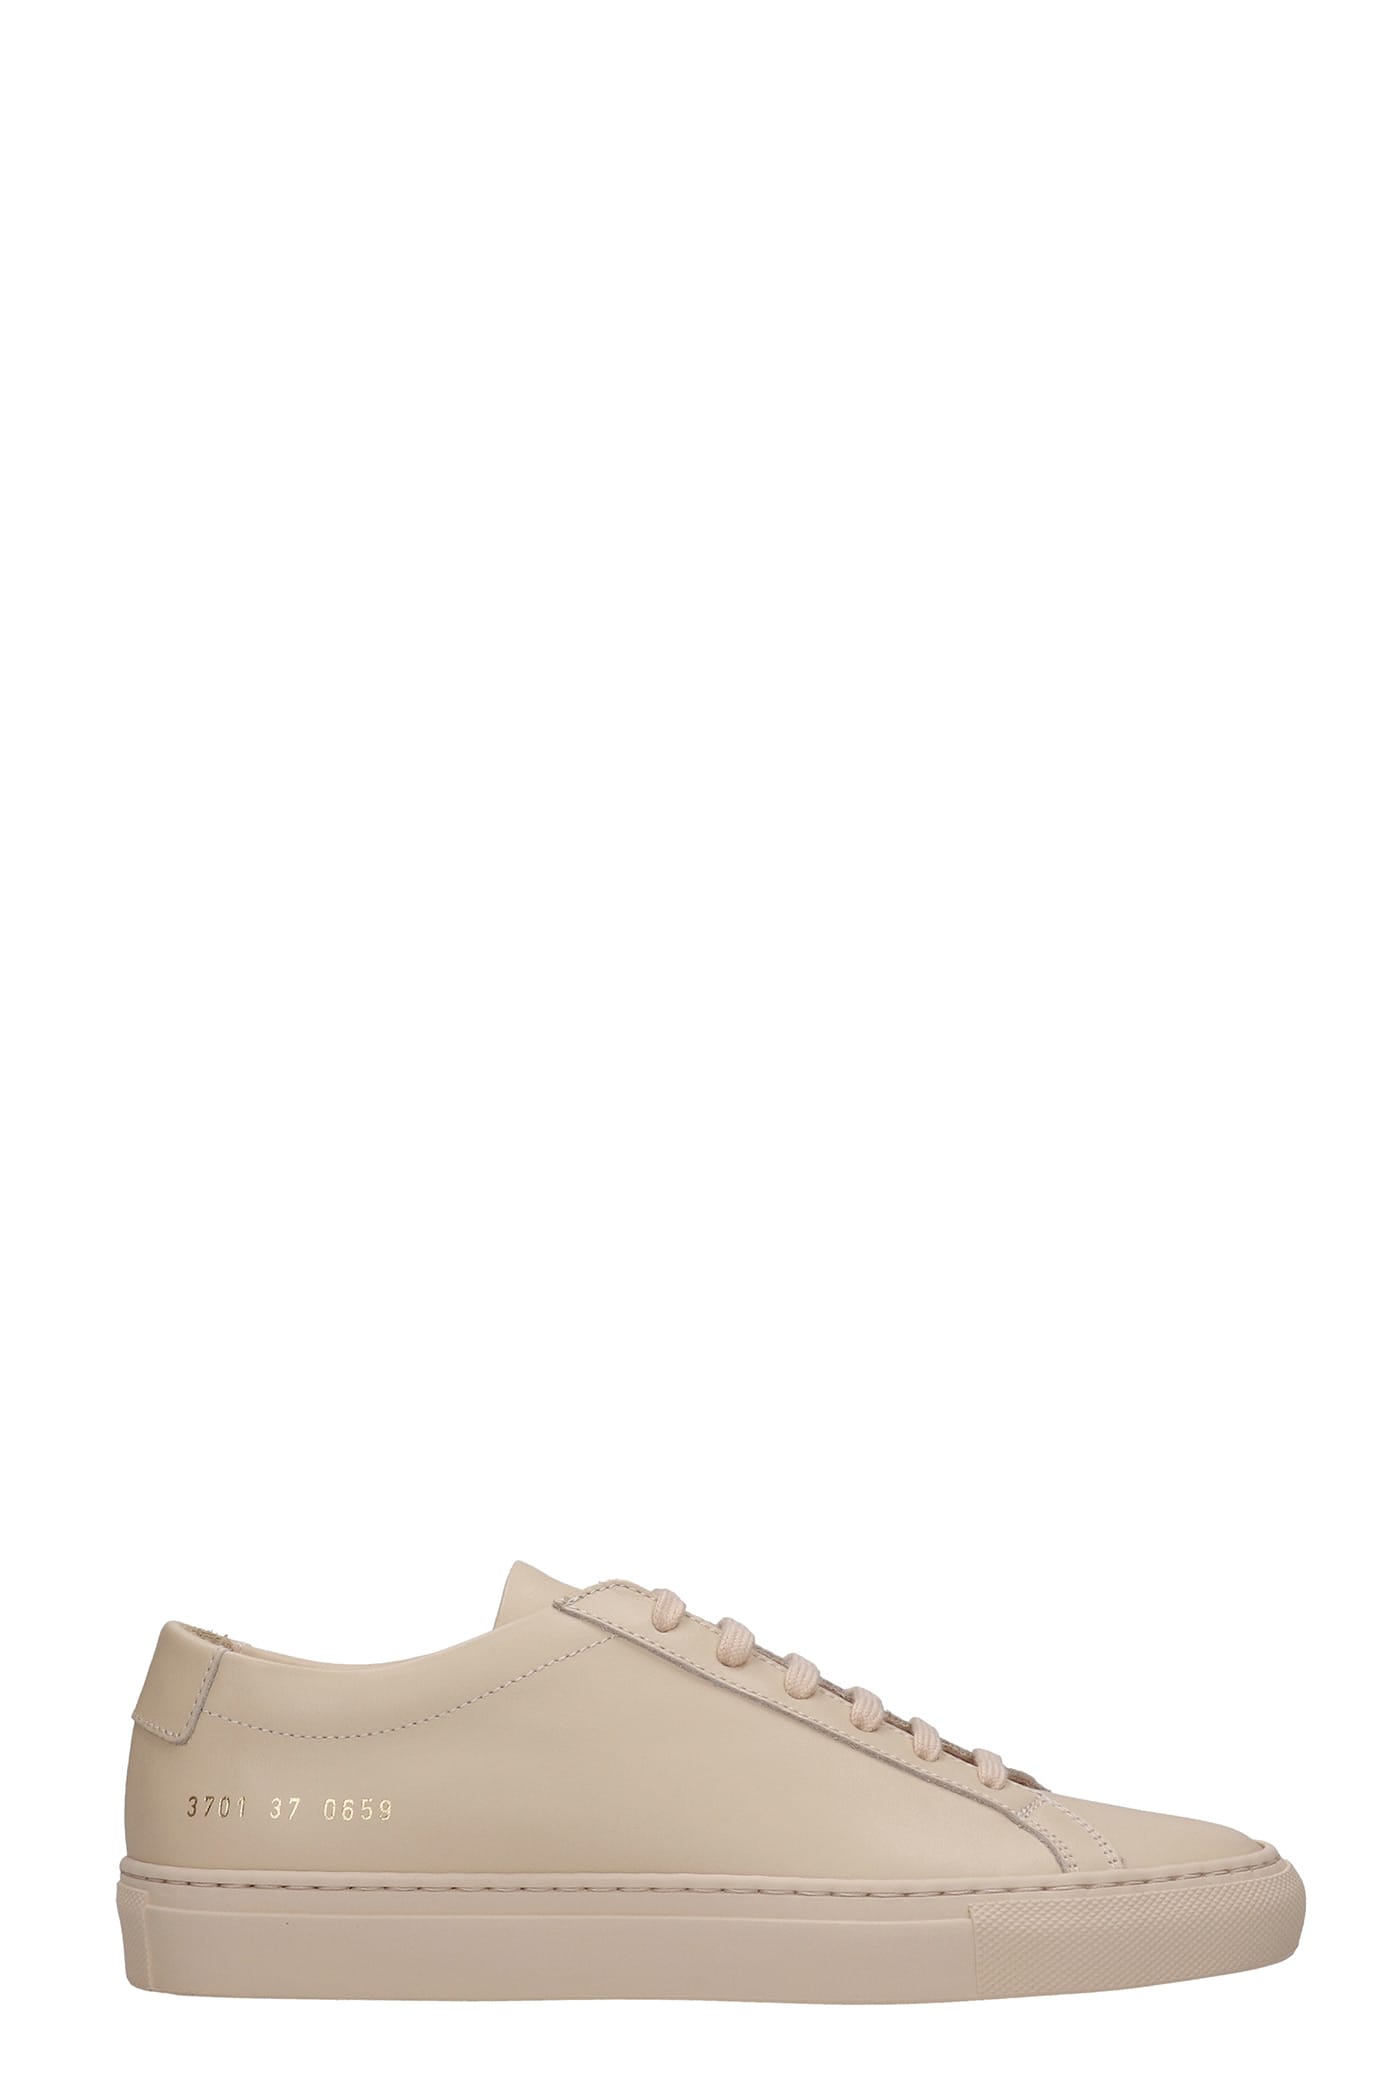 Common Projects Achille Sneakers In Powder Leather